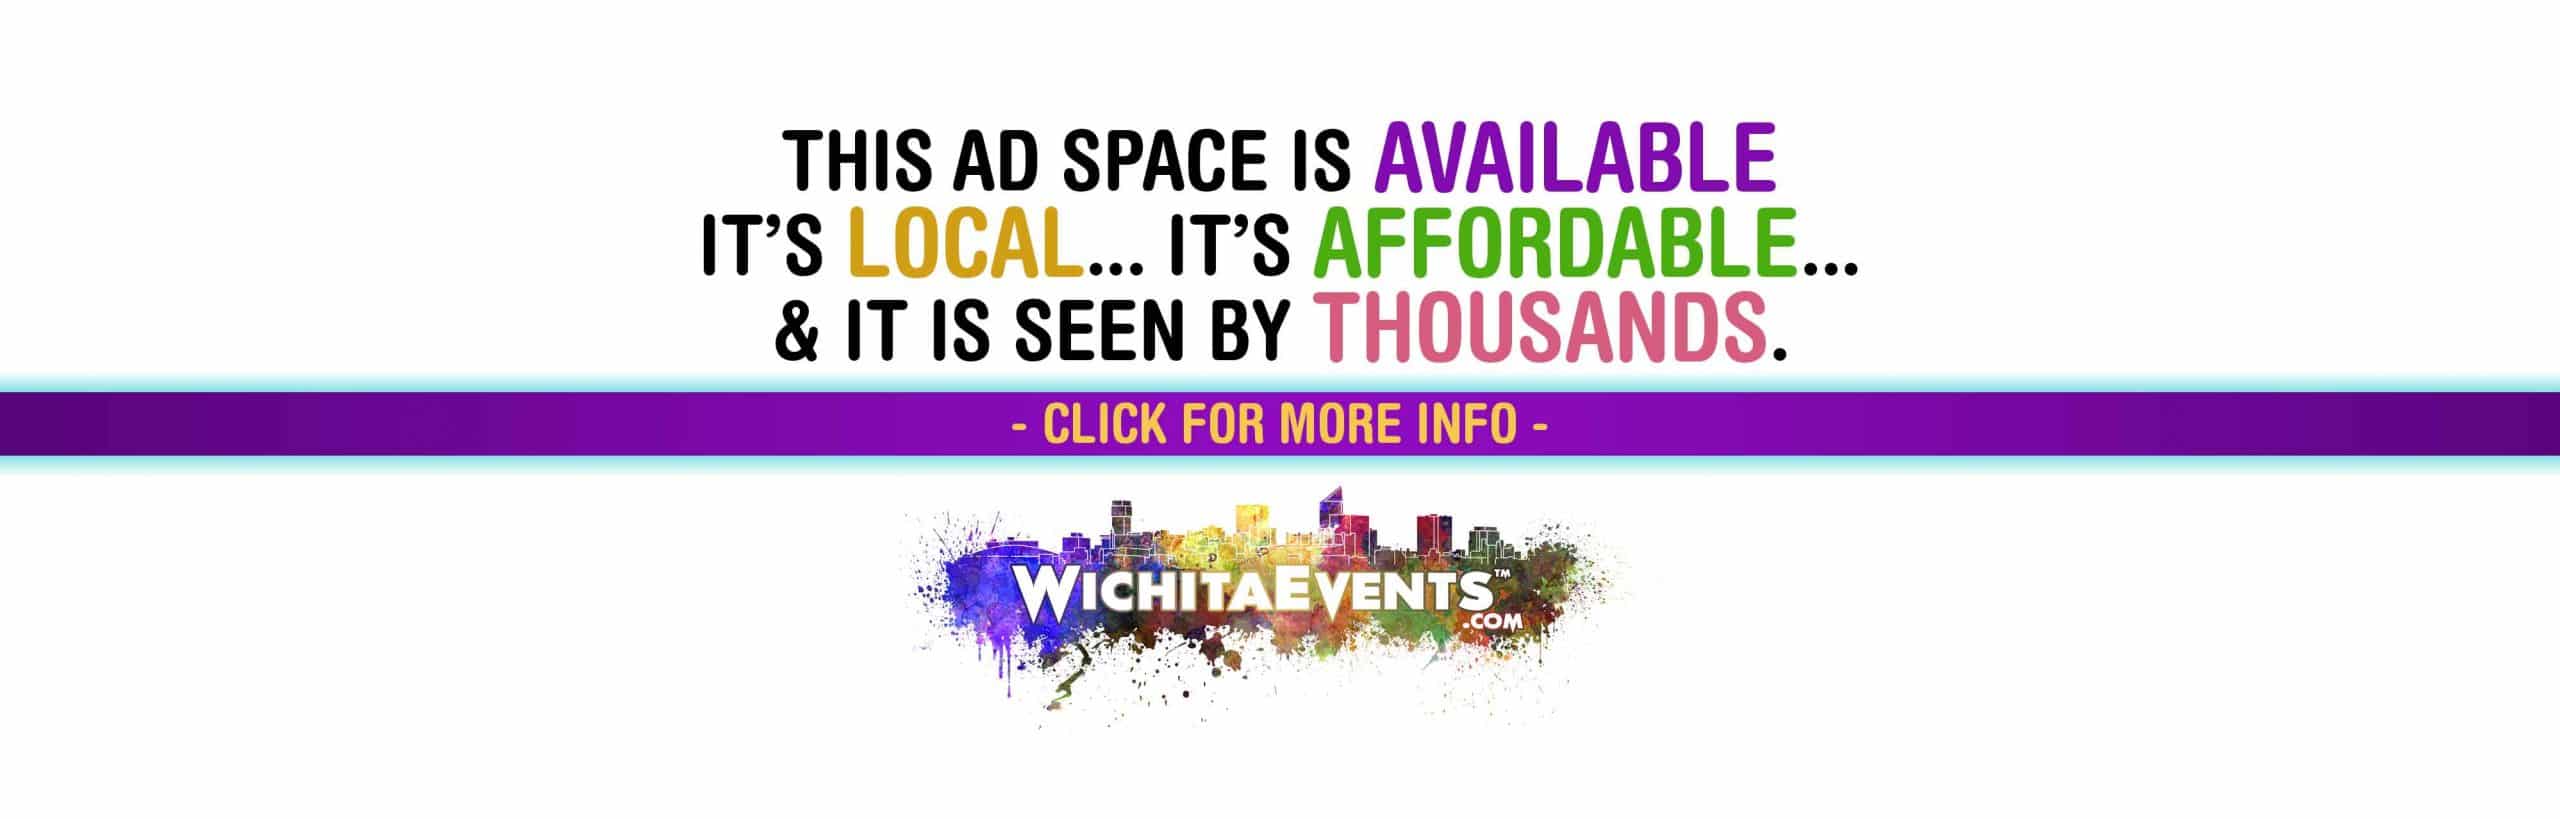 https://wichitaevents.com/wp-content/uploads/2021/05/Wichita-Events-Advertise-HERE-Homepage-Banner-LO-RES-scaled.jpg